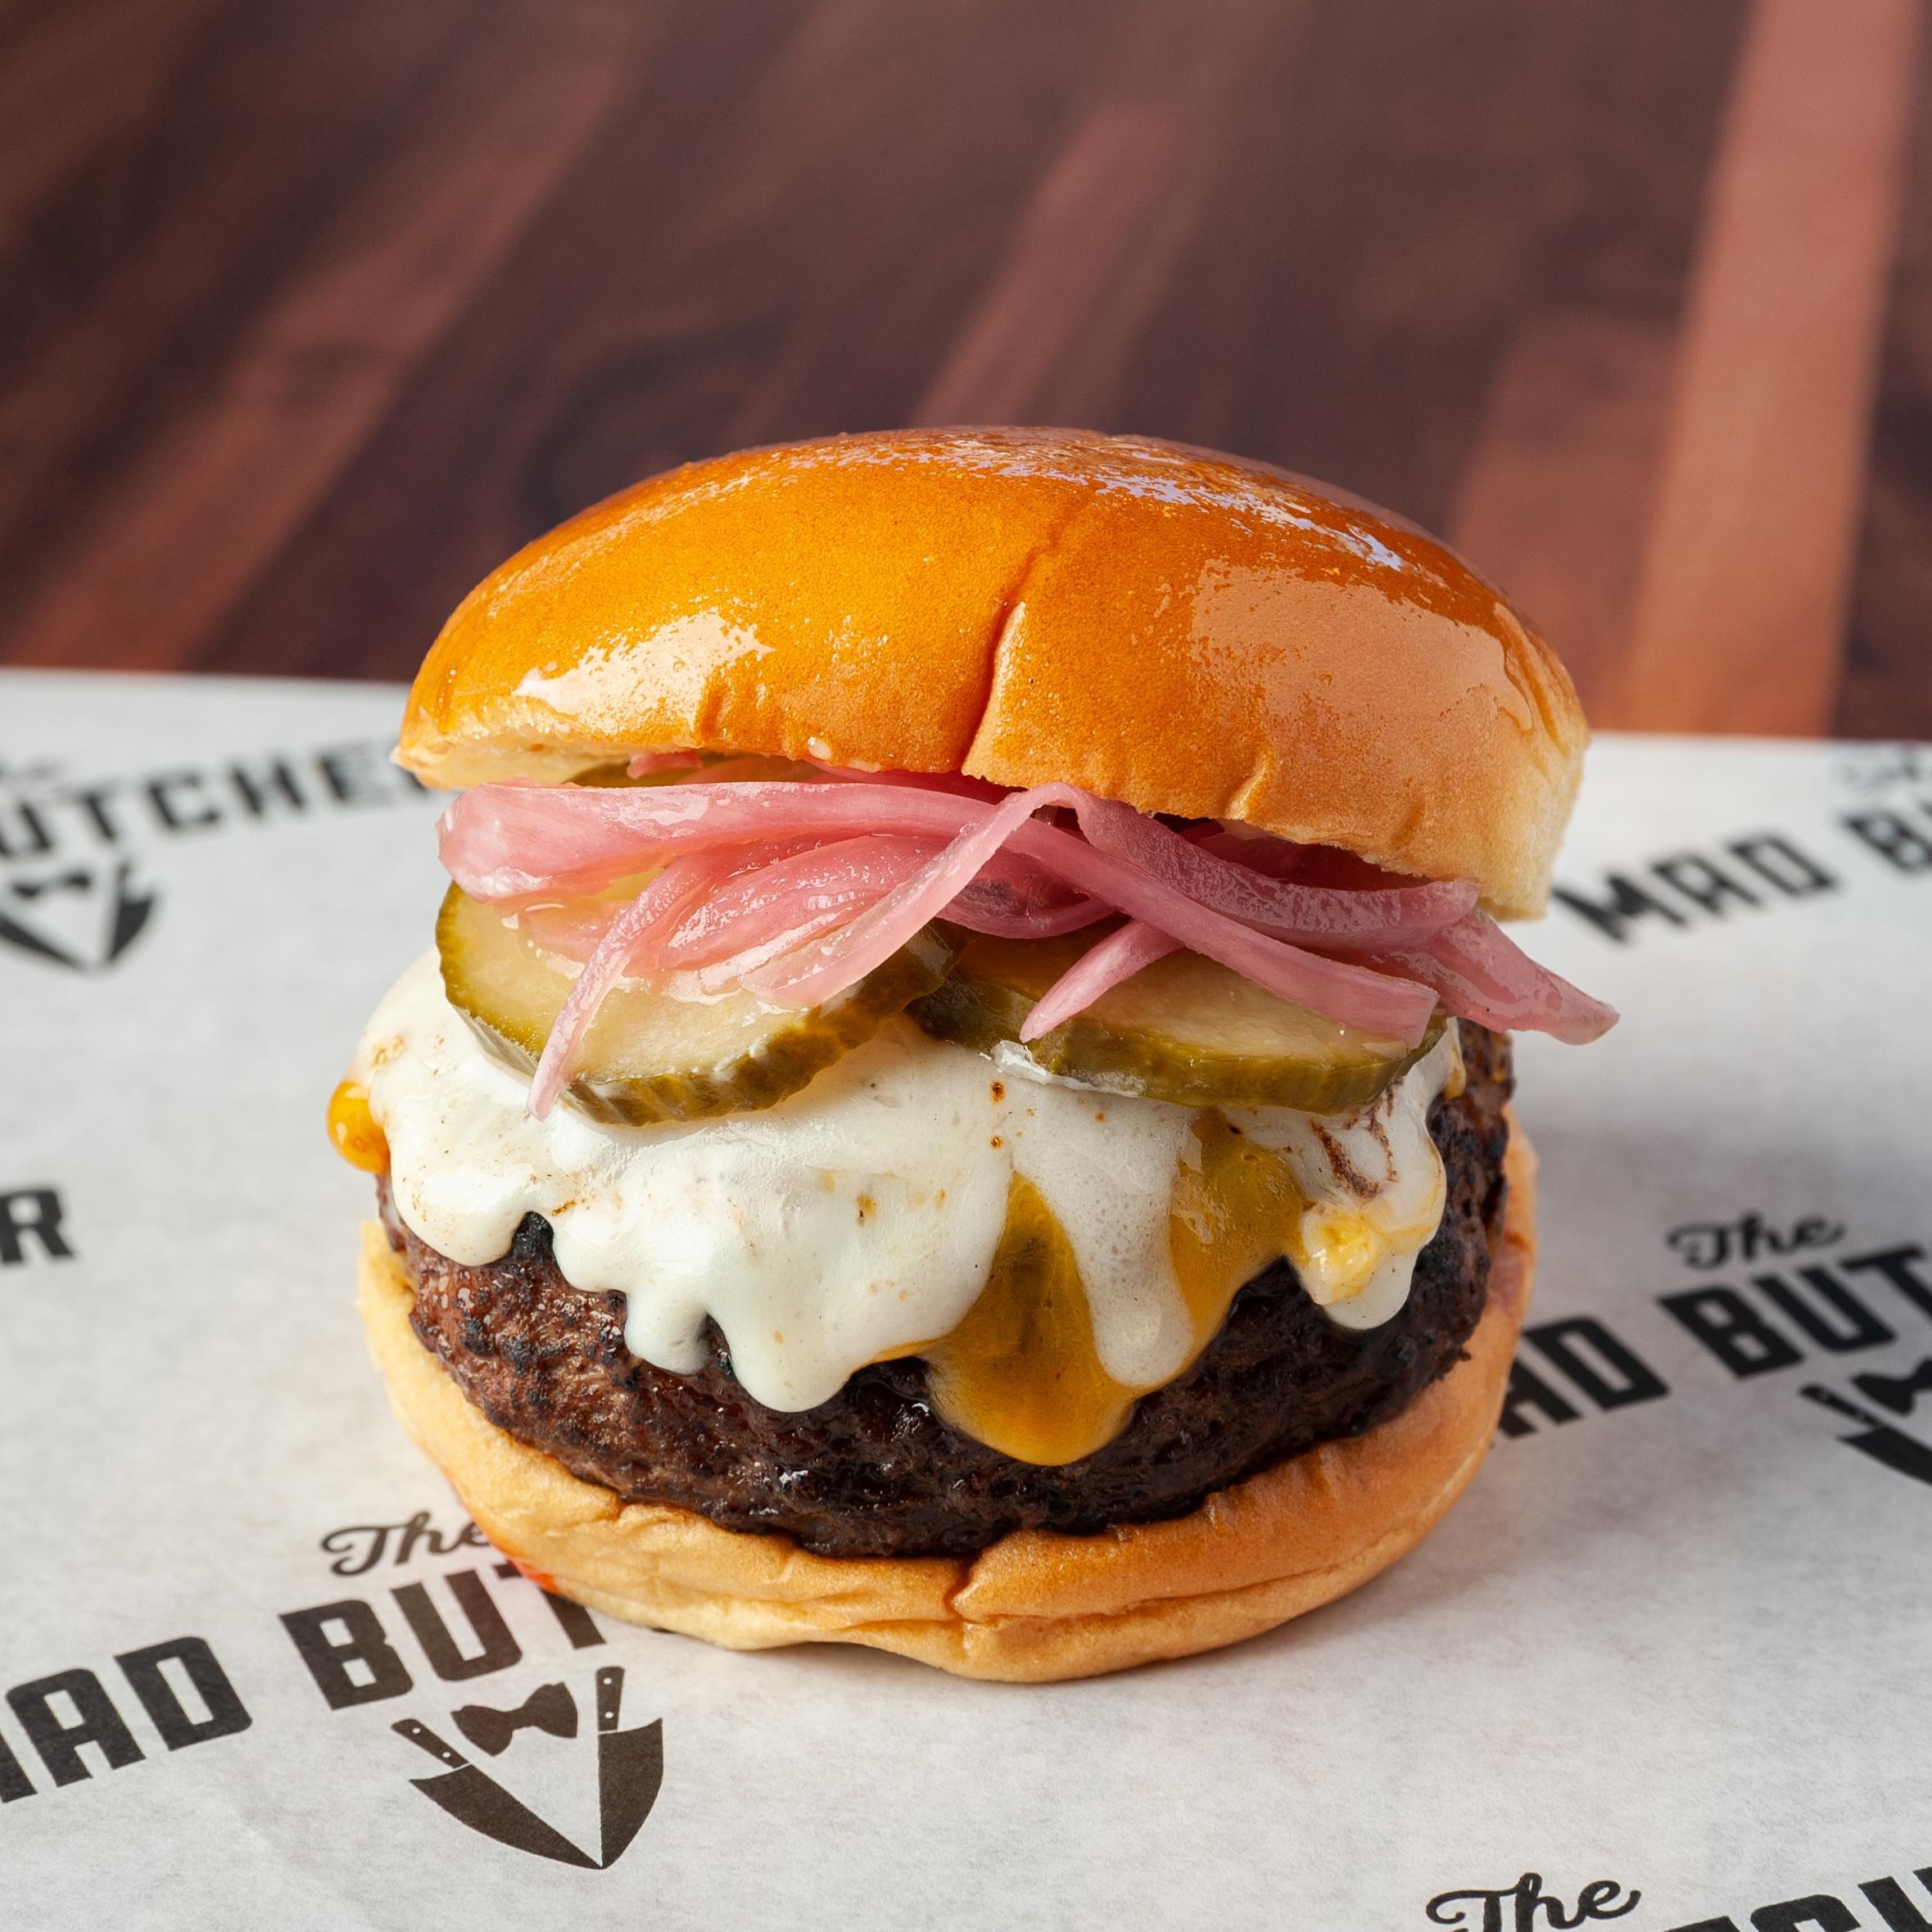 THE MAD BUTCHER BURGER